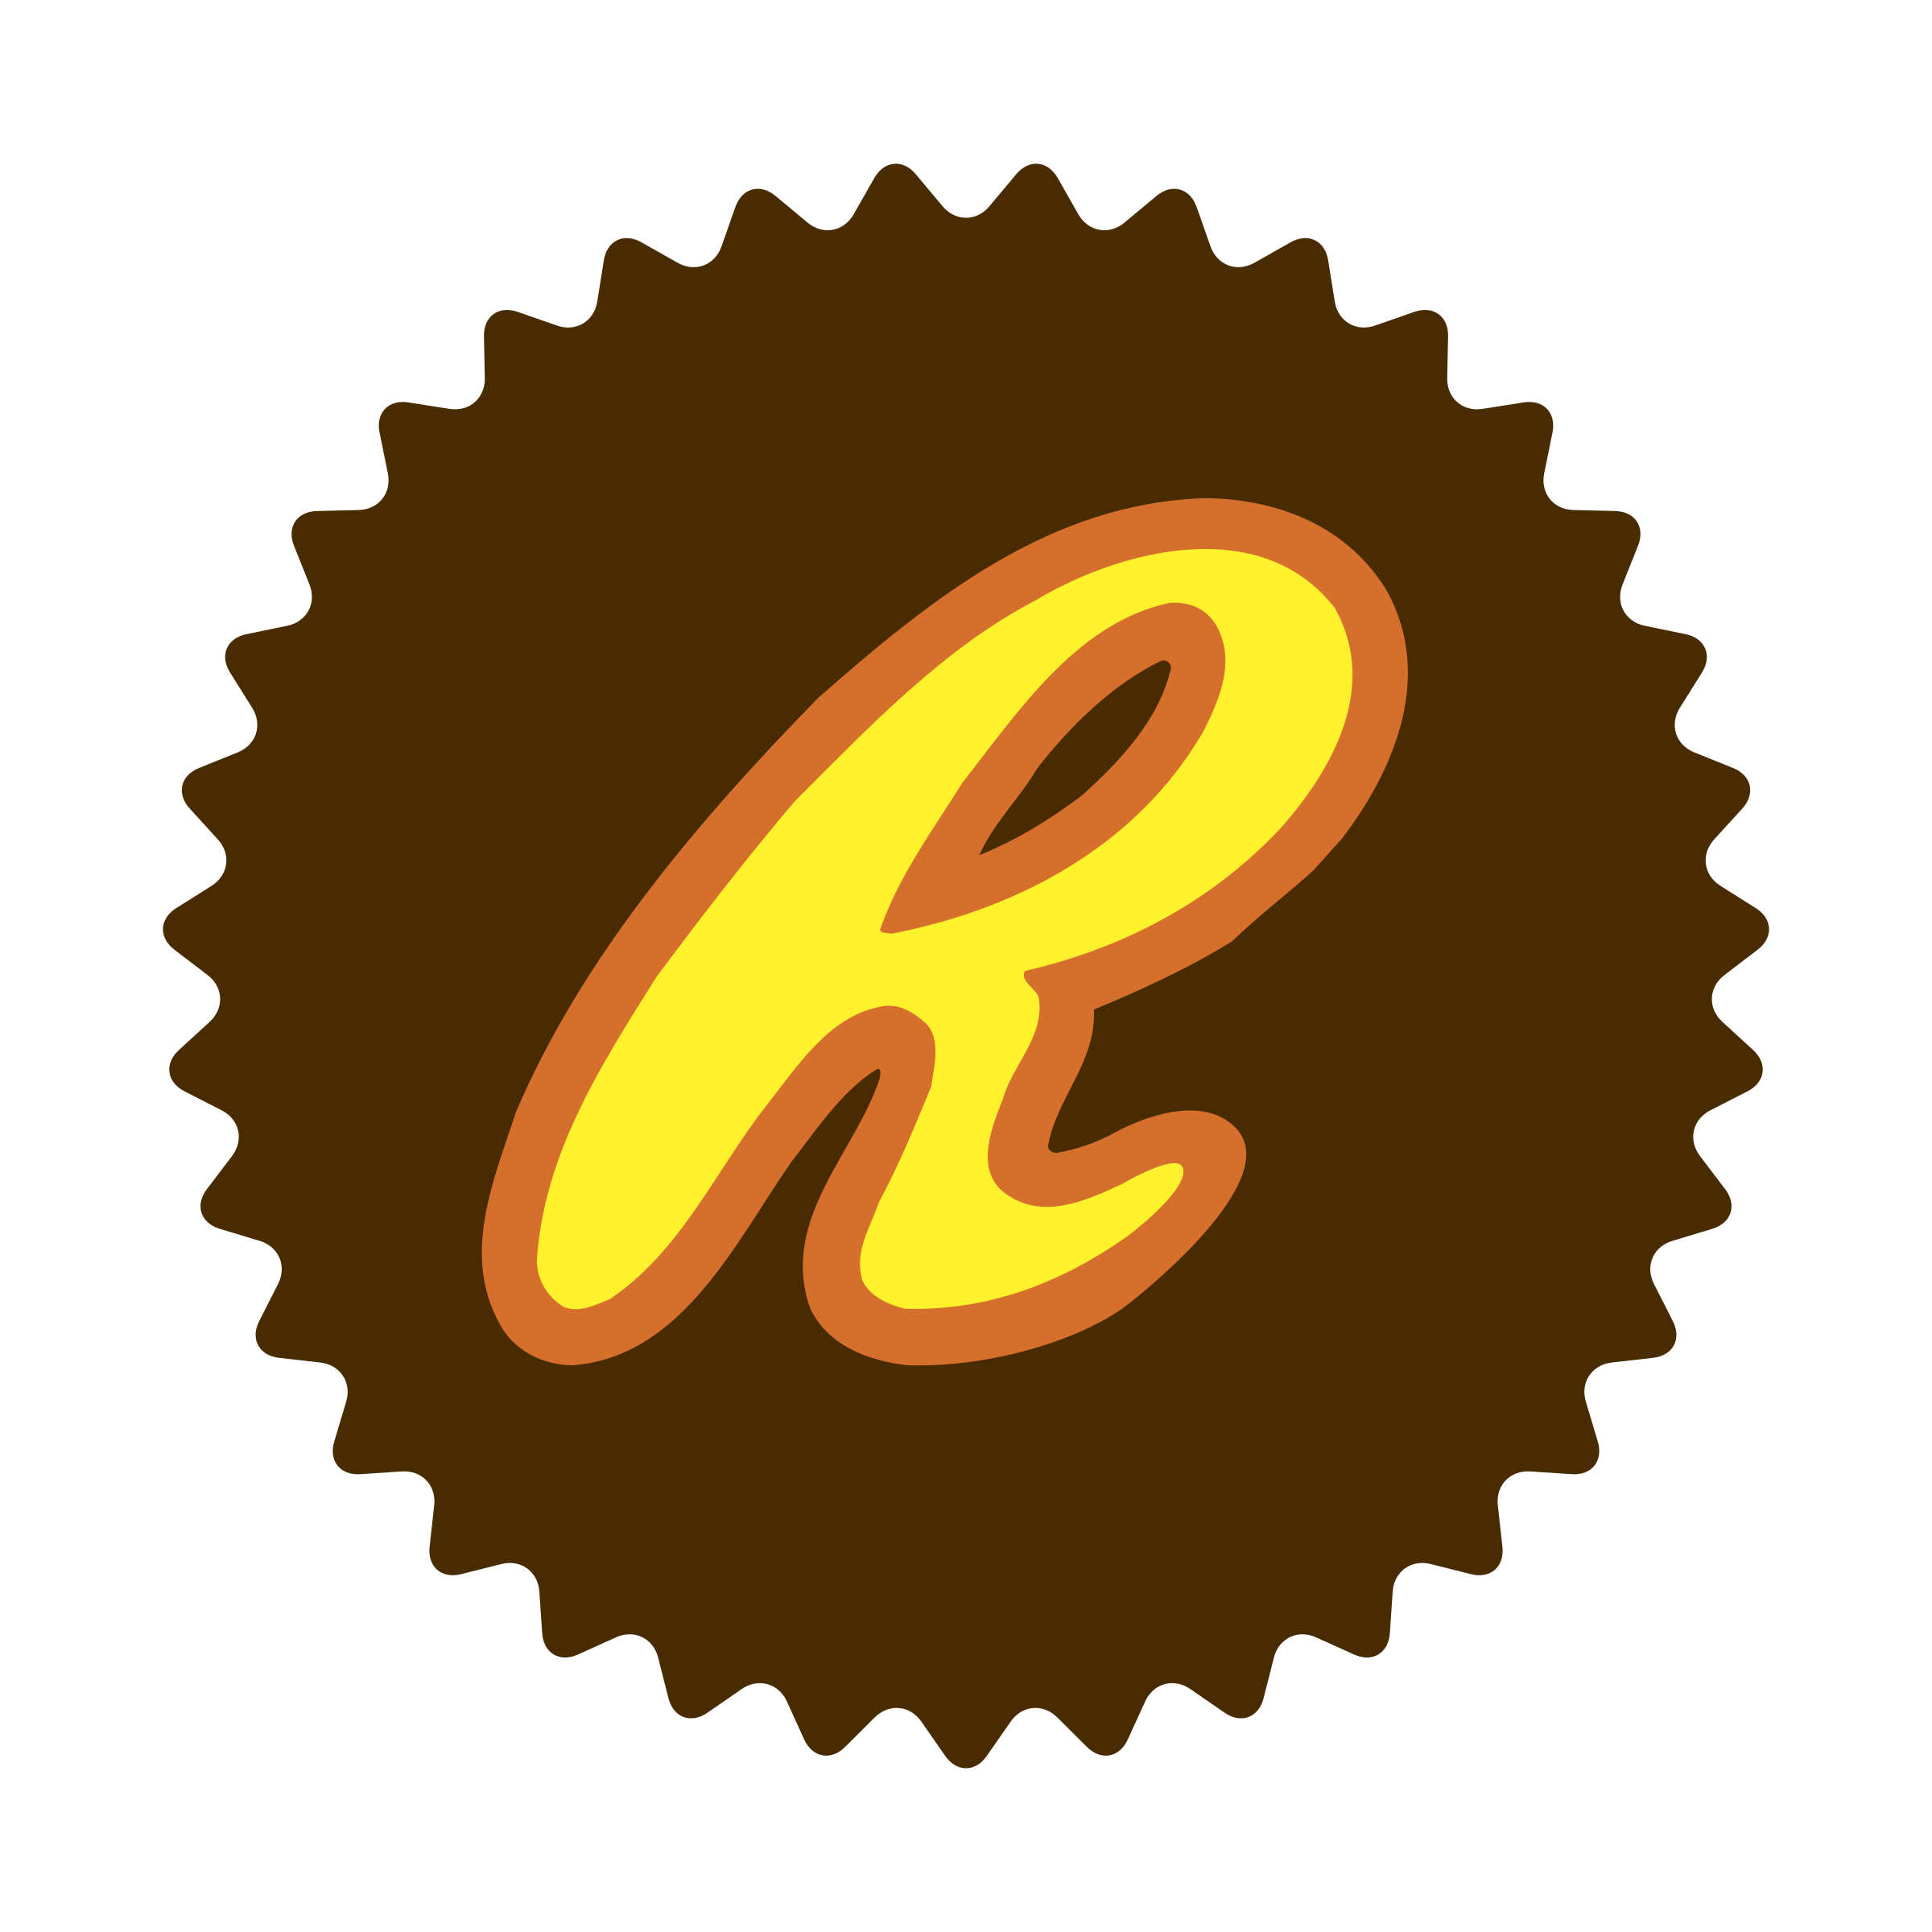 Reese's Logo - Reese's Logo PNG Transparent & SVG Vector - Freebie Supply